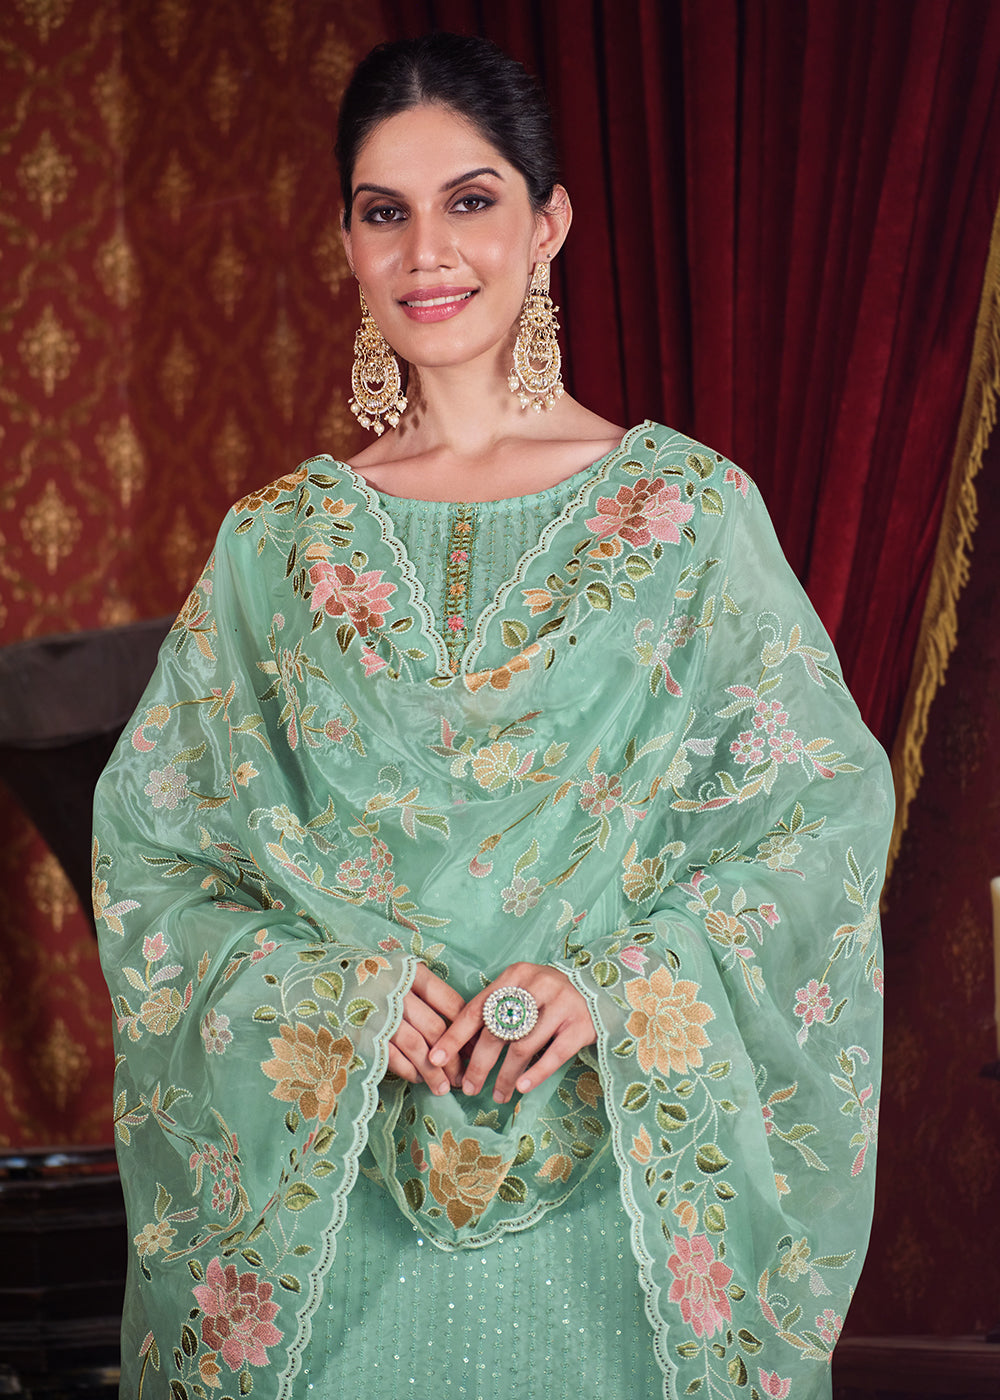 Buy Now Soft Organza Silk Turquoise Embroidered Pant Style Suit Online in USA, UK, Canada, Germany & Worldwide at Empress Clothing.